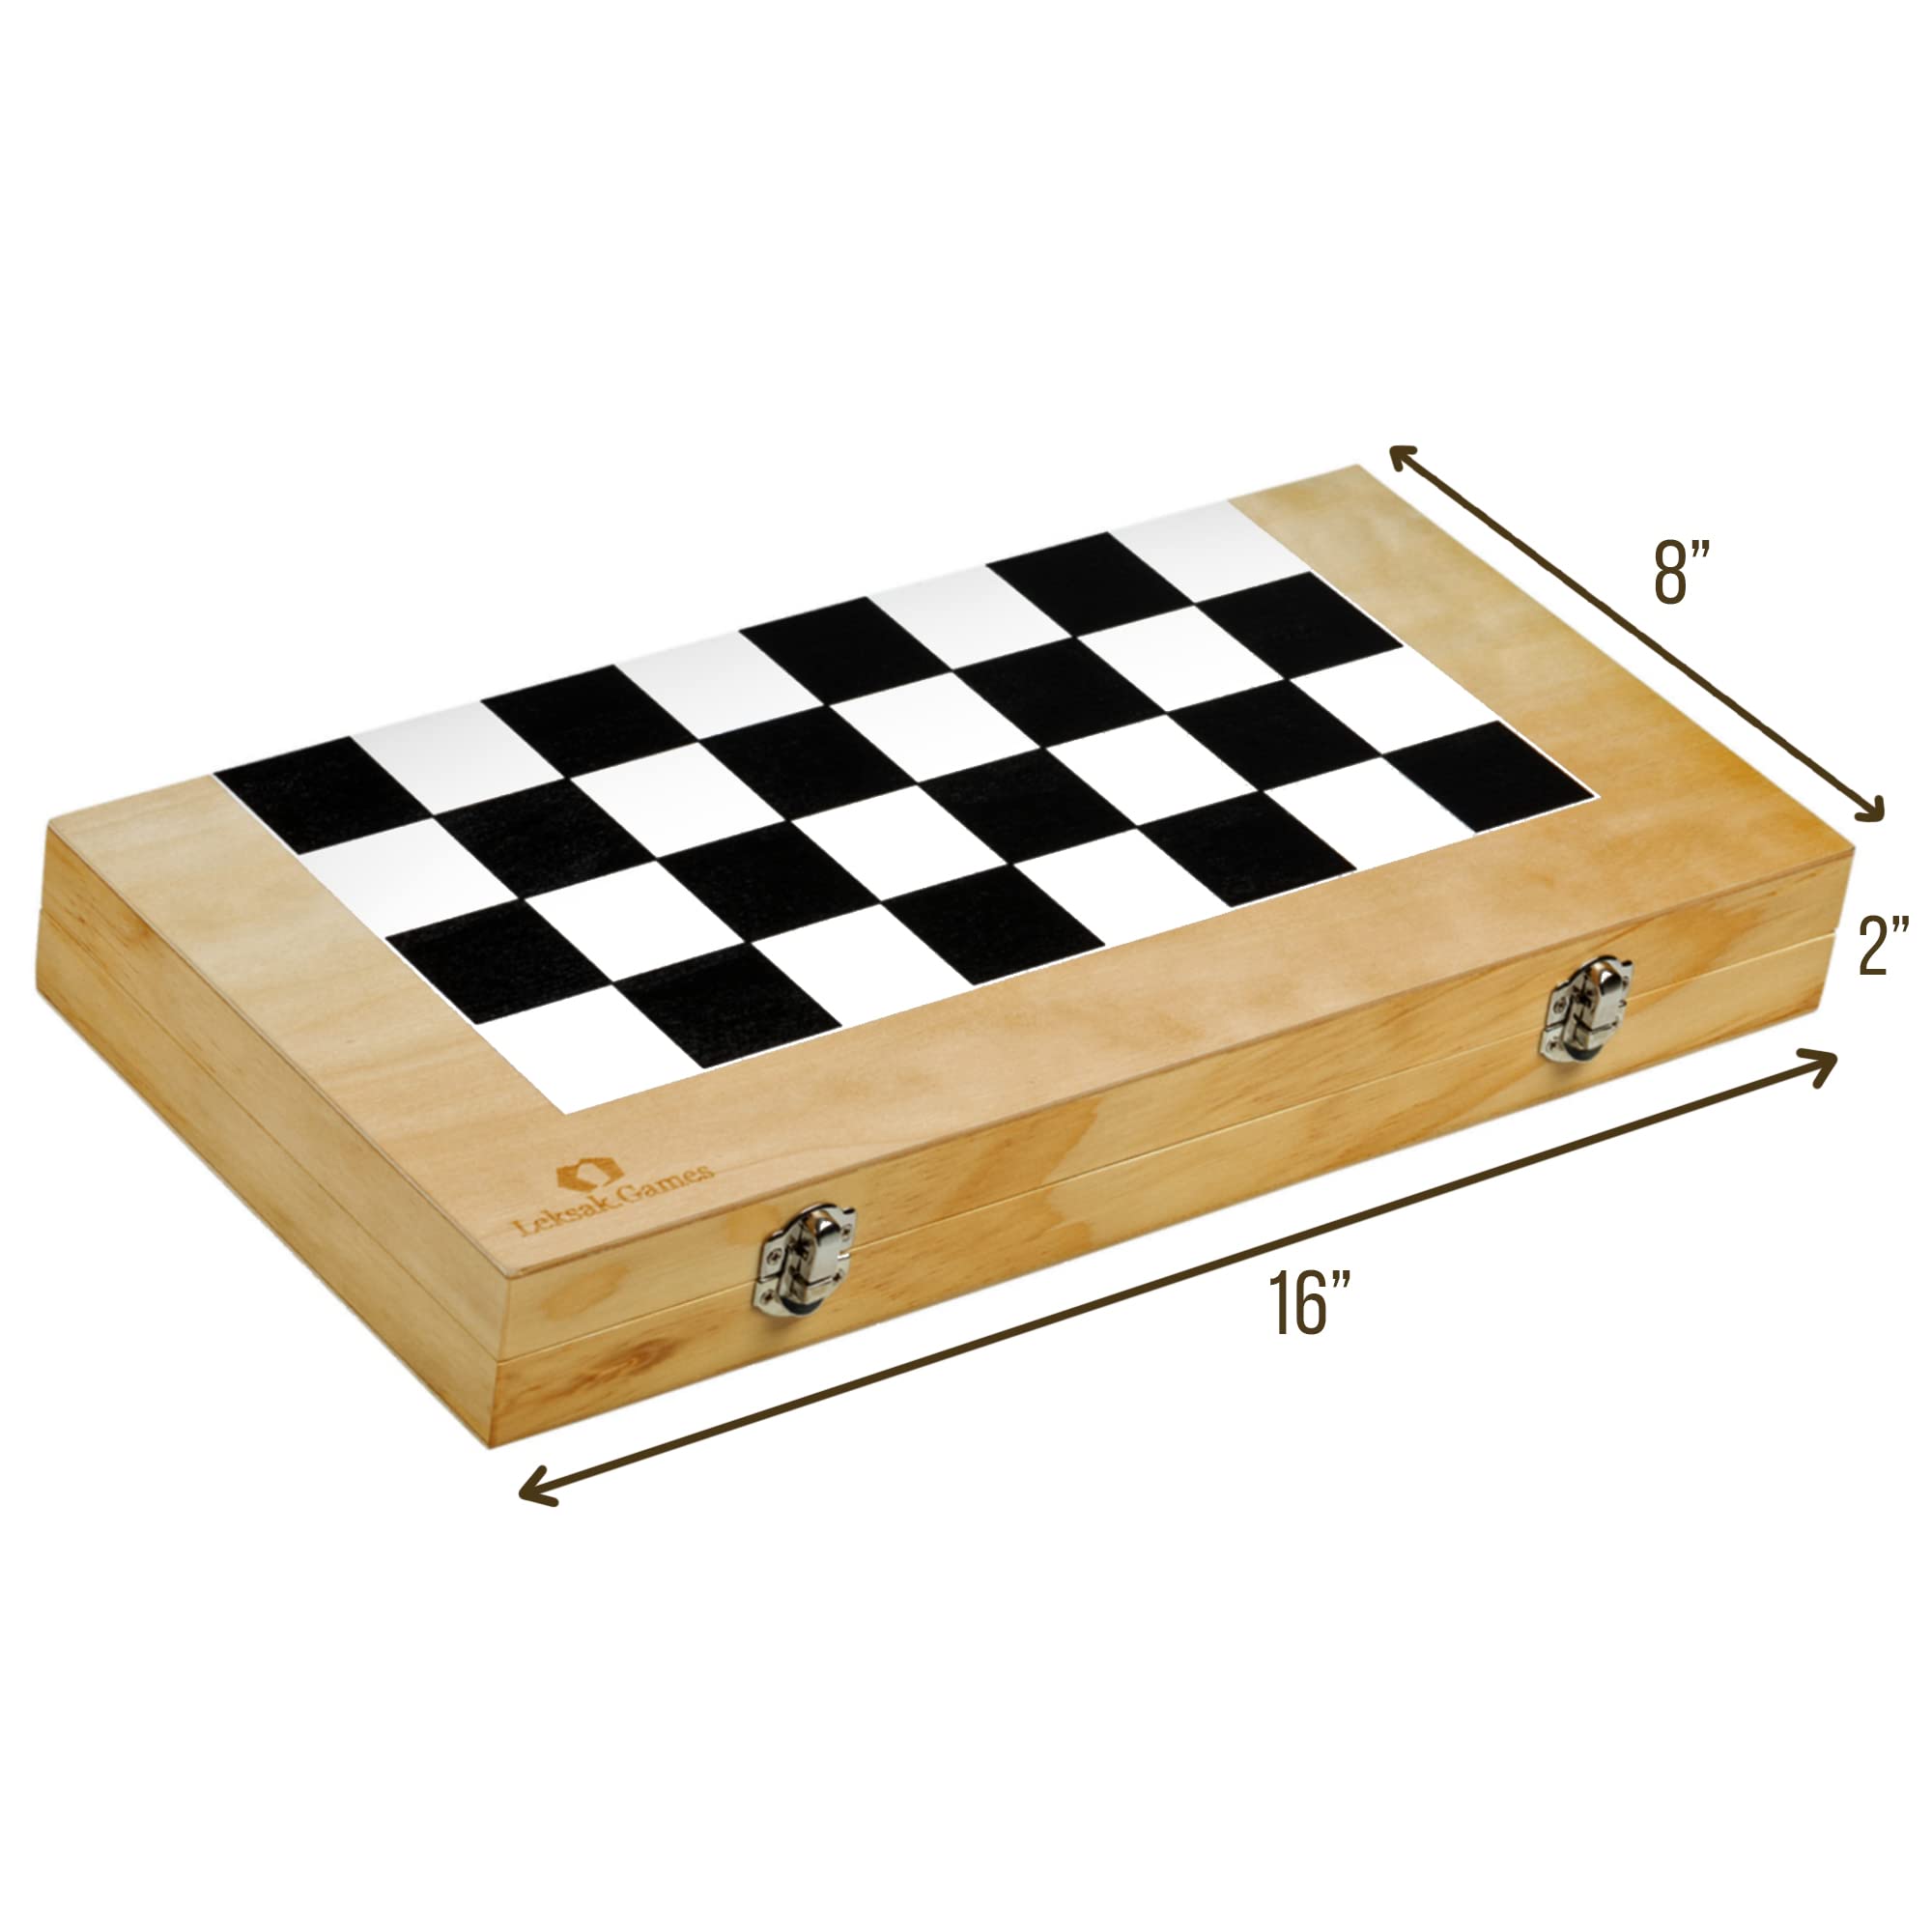 Leksak Games 16'' Wooden Chess Checkers Backgammon Set - 3 in 1 Board Games - Portable Travel Case Folding Board - Beginner Chess Set for Kids and Adults - 30 Checkers Pieces